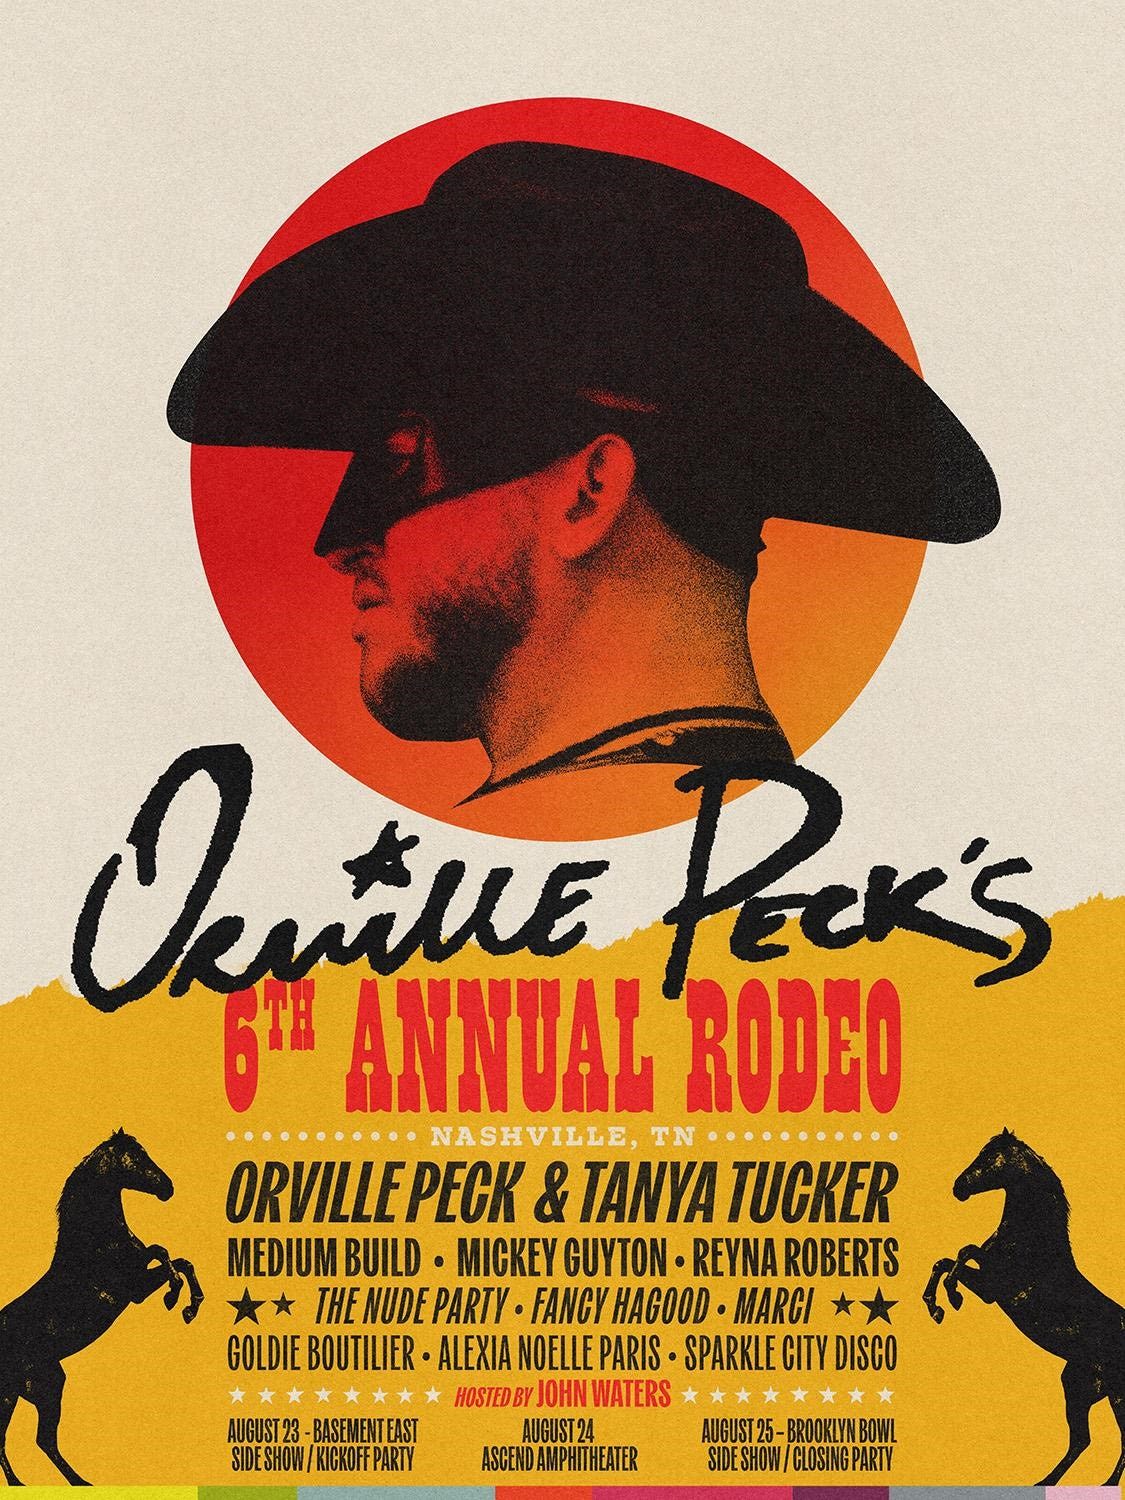 Orville Peck's annual 'Rodeo' festival is coming to Nashville in August